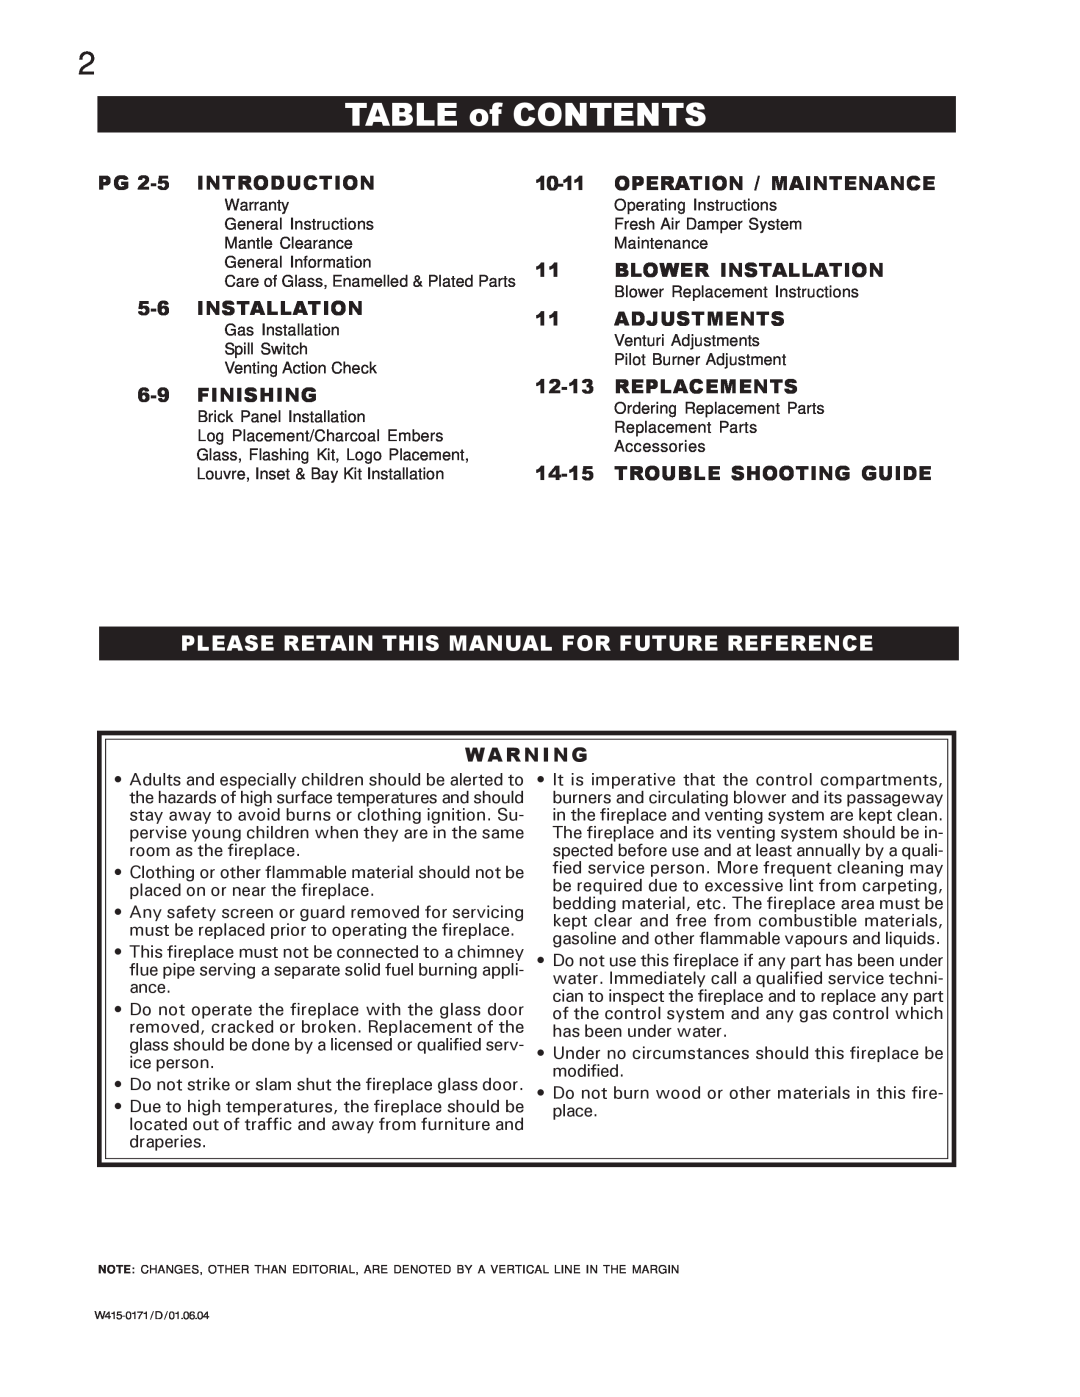 Napoleon Fireplaces GI3016-N, GI3016-P manual TABLE of CONTENTS, Please Retain This Manual For Future Reference 